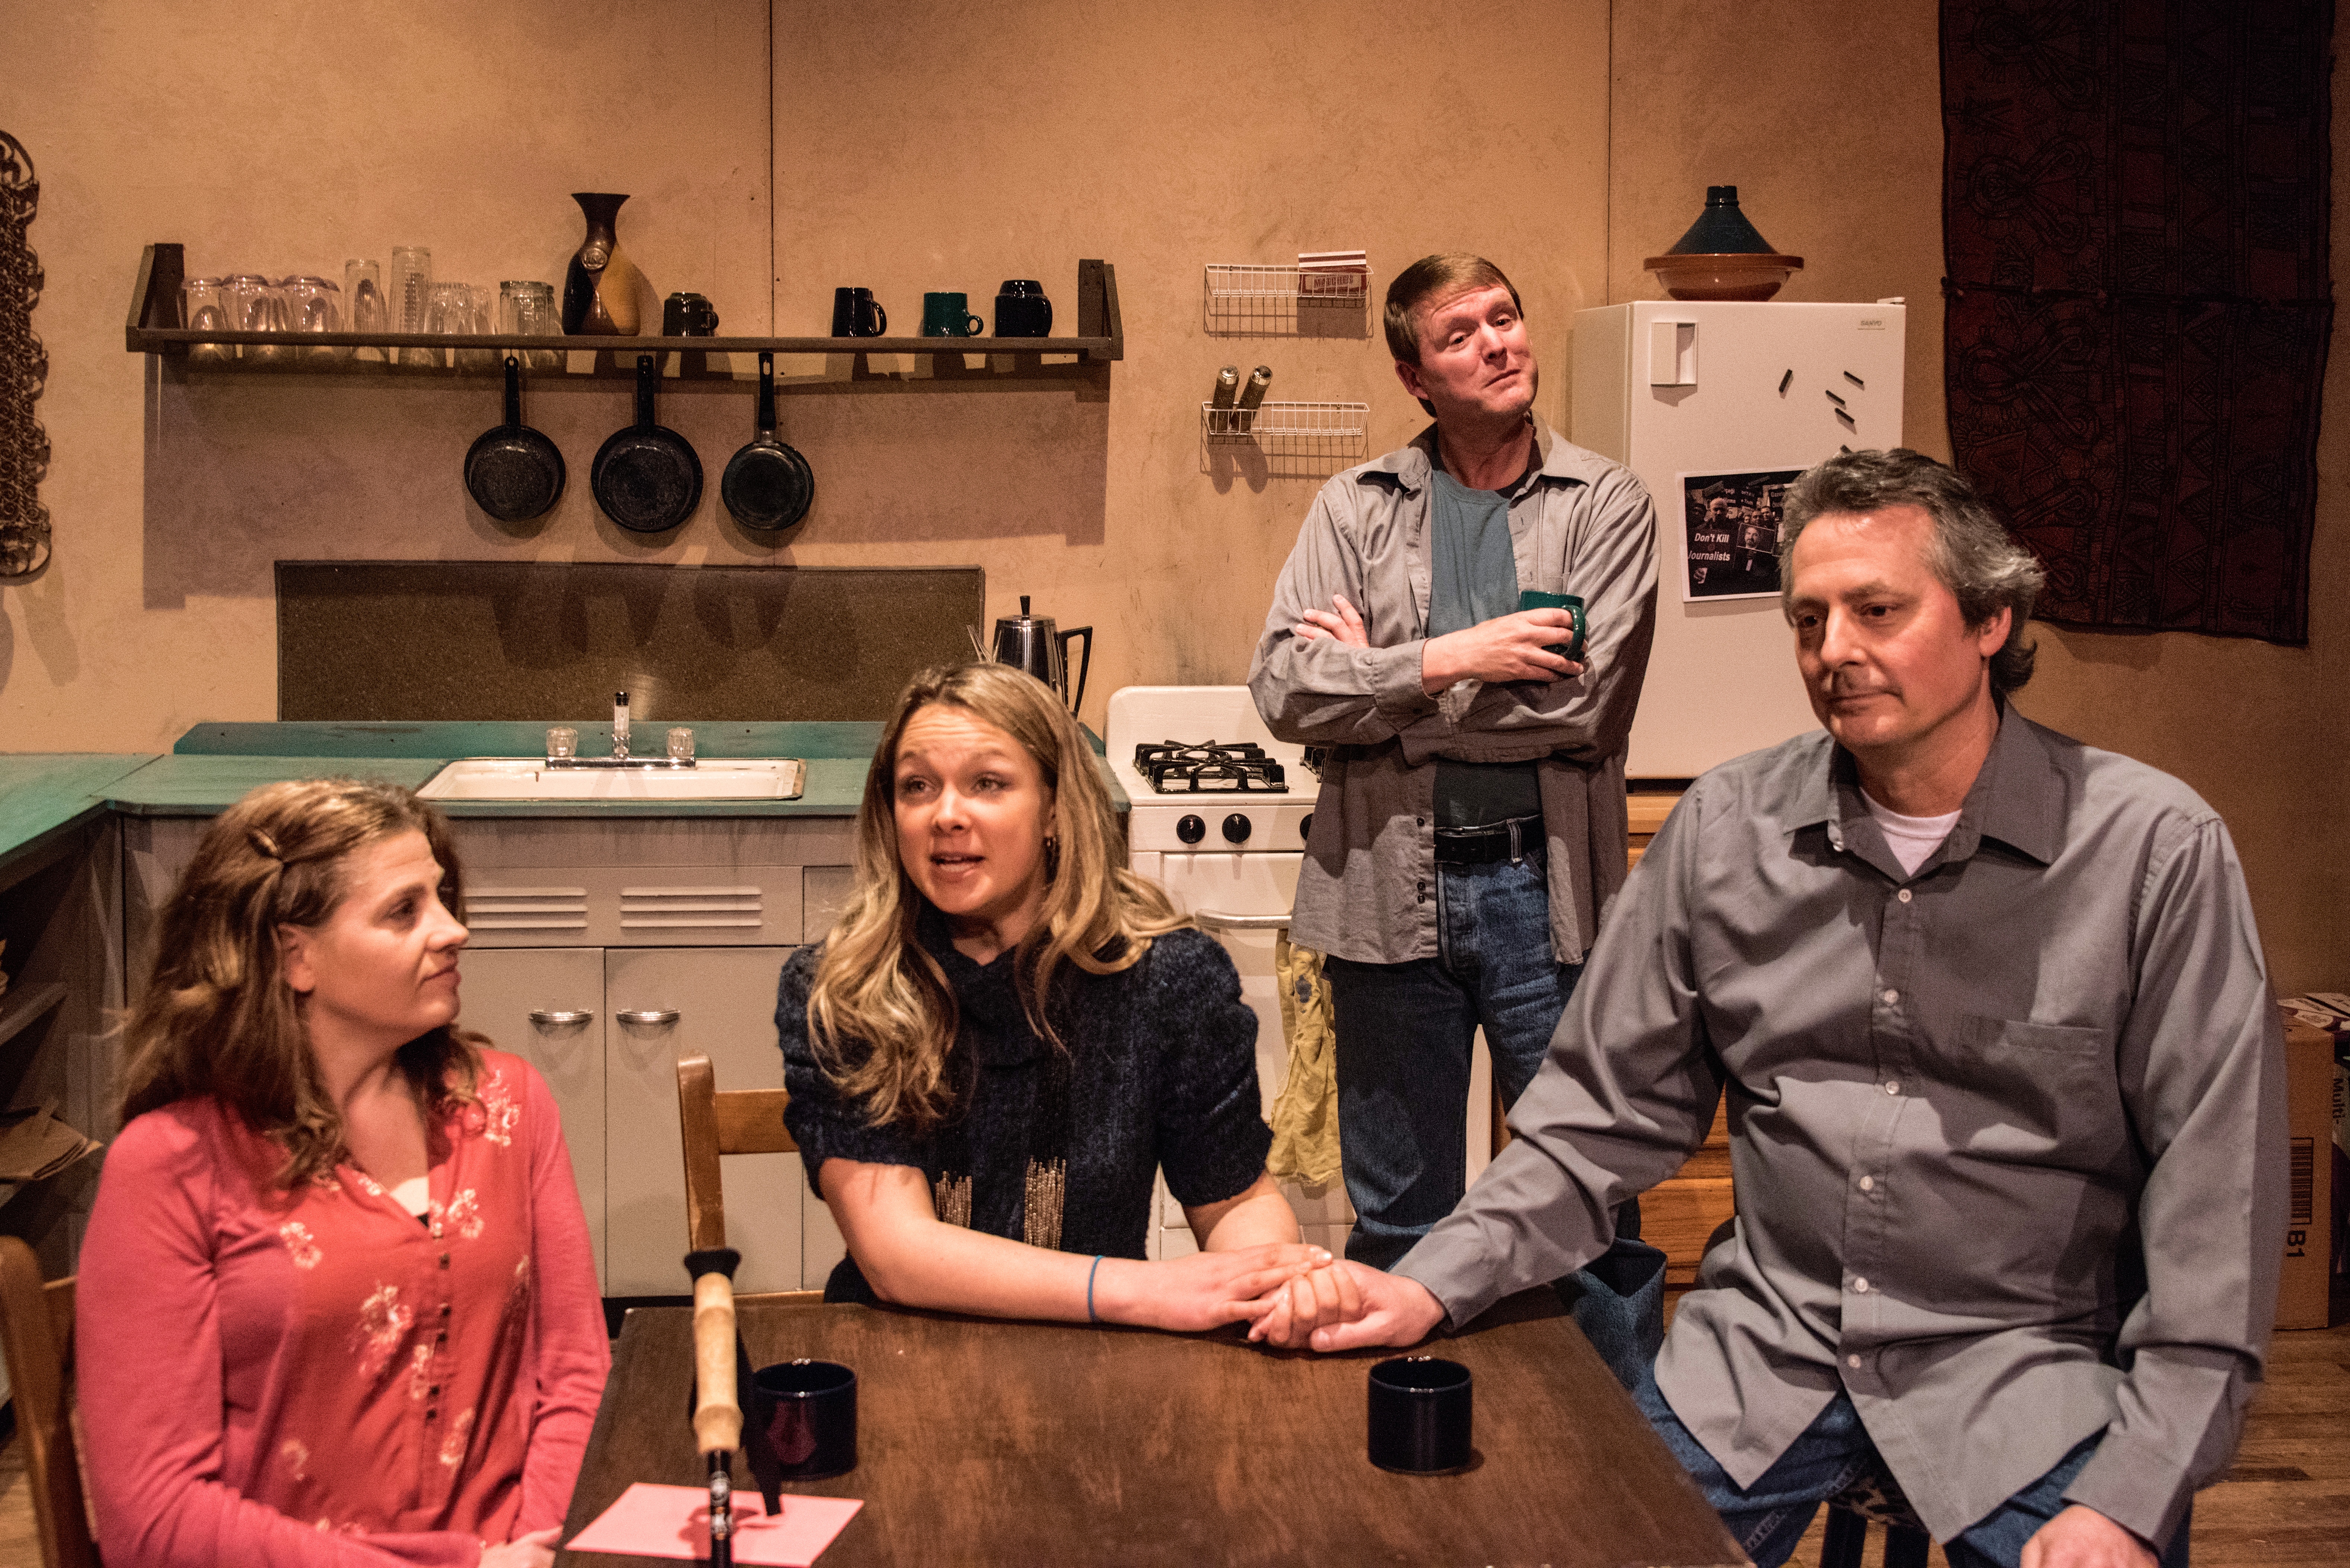 The Very Little Theatre adds one more show to its production of “Time Stands Still” in its Stage Left performance space